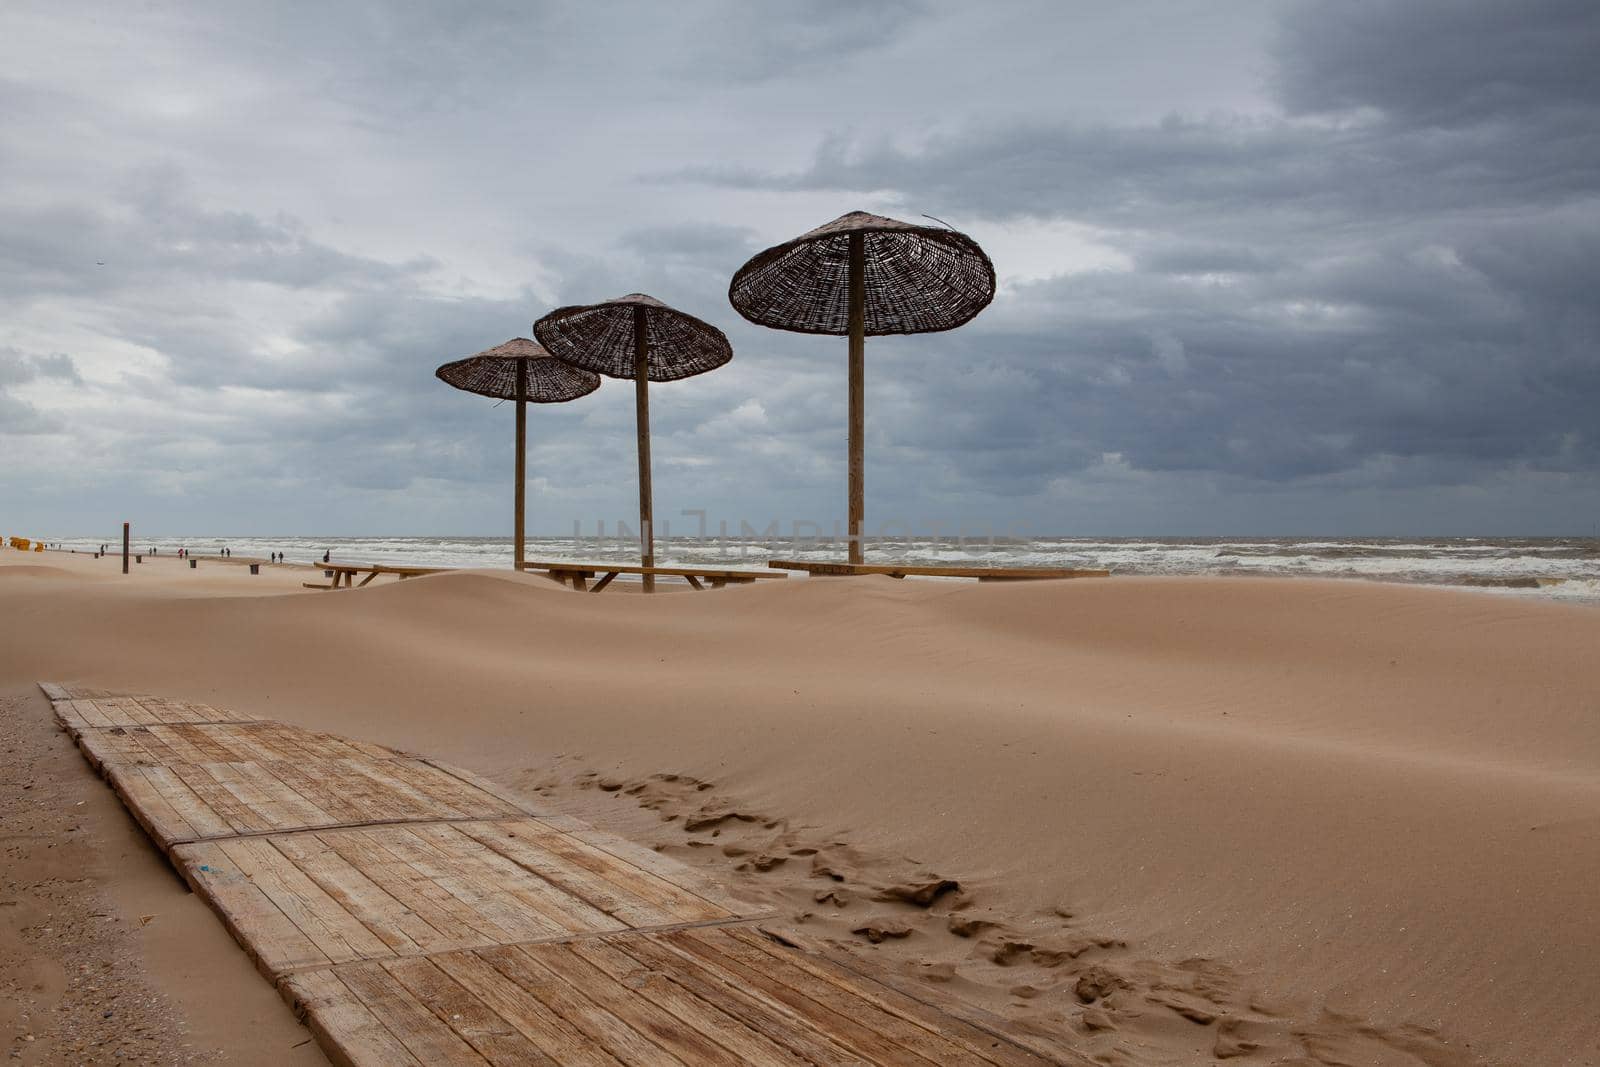 The sand-covered tables on the beach in Egmont aan Zee, Netherlands.  by CaptureLight